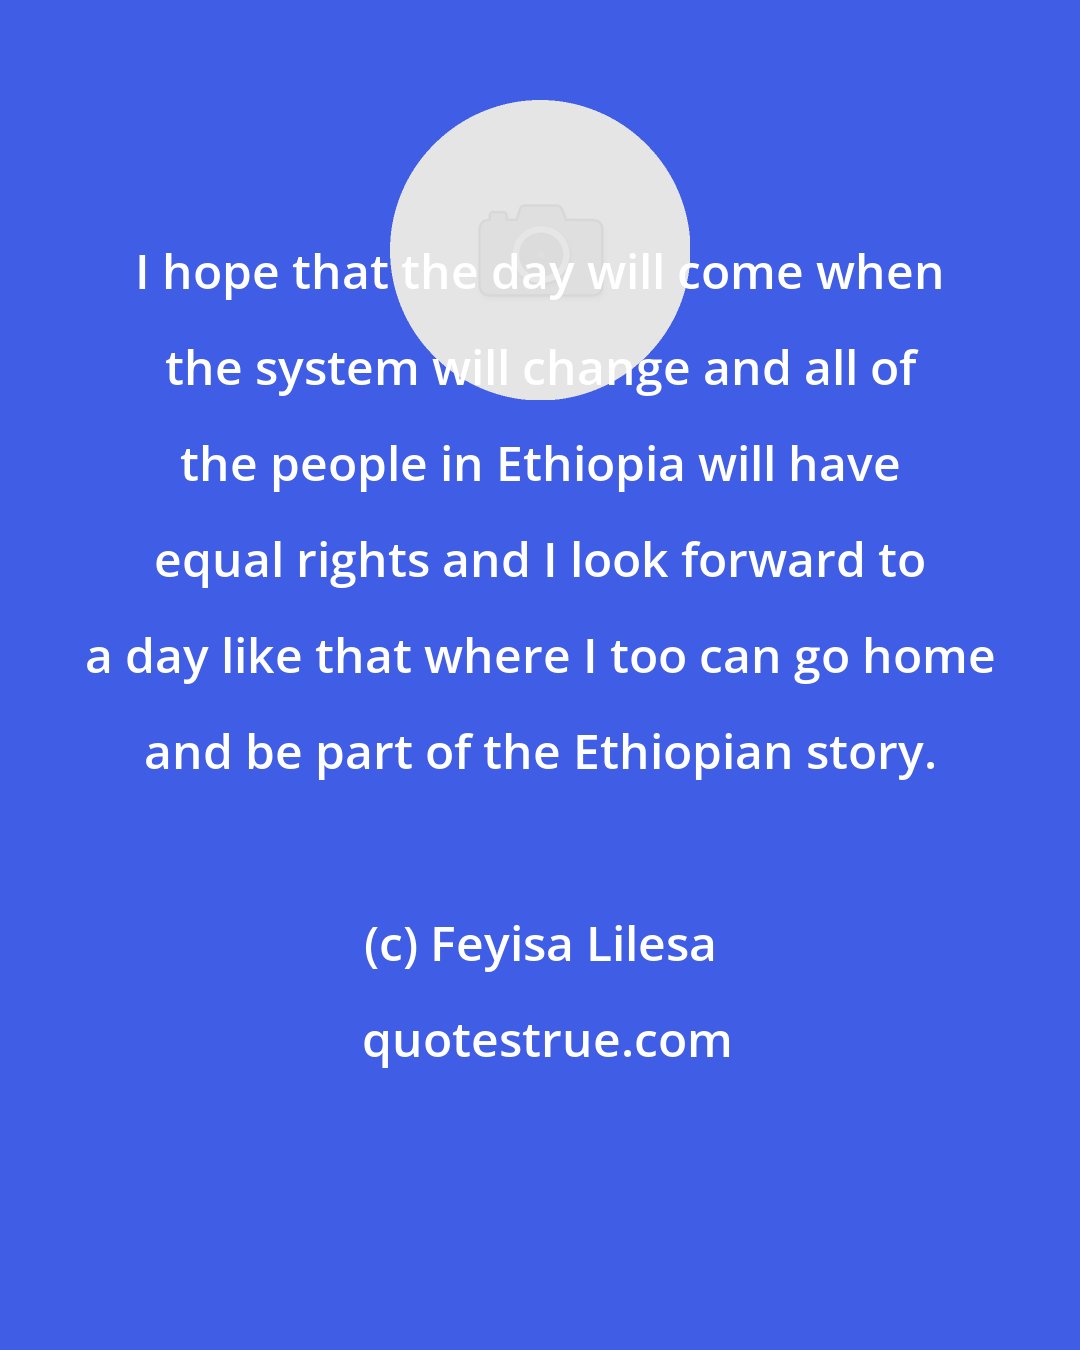 Feyisa Lilesa: I hope that the day will come when the system will change and all of the people in Ethiopia will have equal rights and I look forward to a day like that where I too can go home and be part of the Ethiopian story.